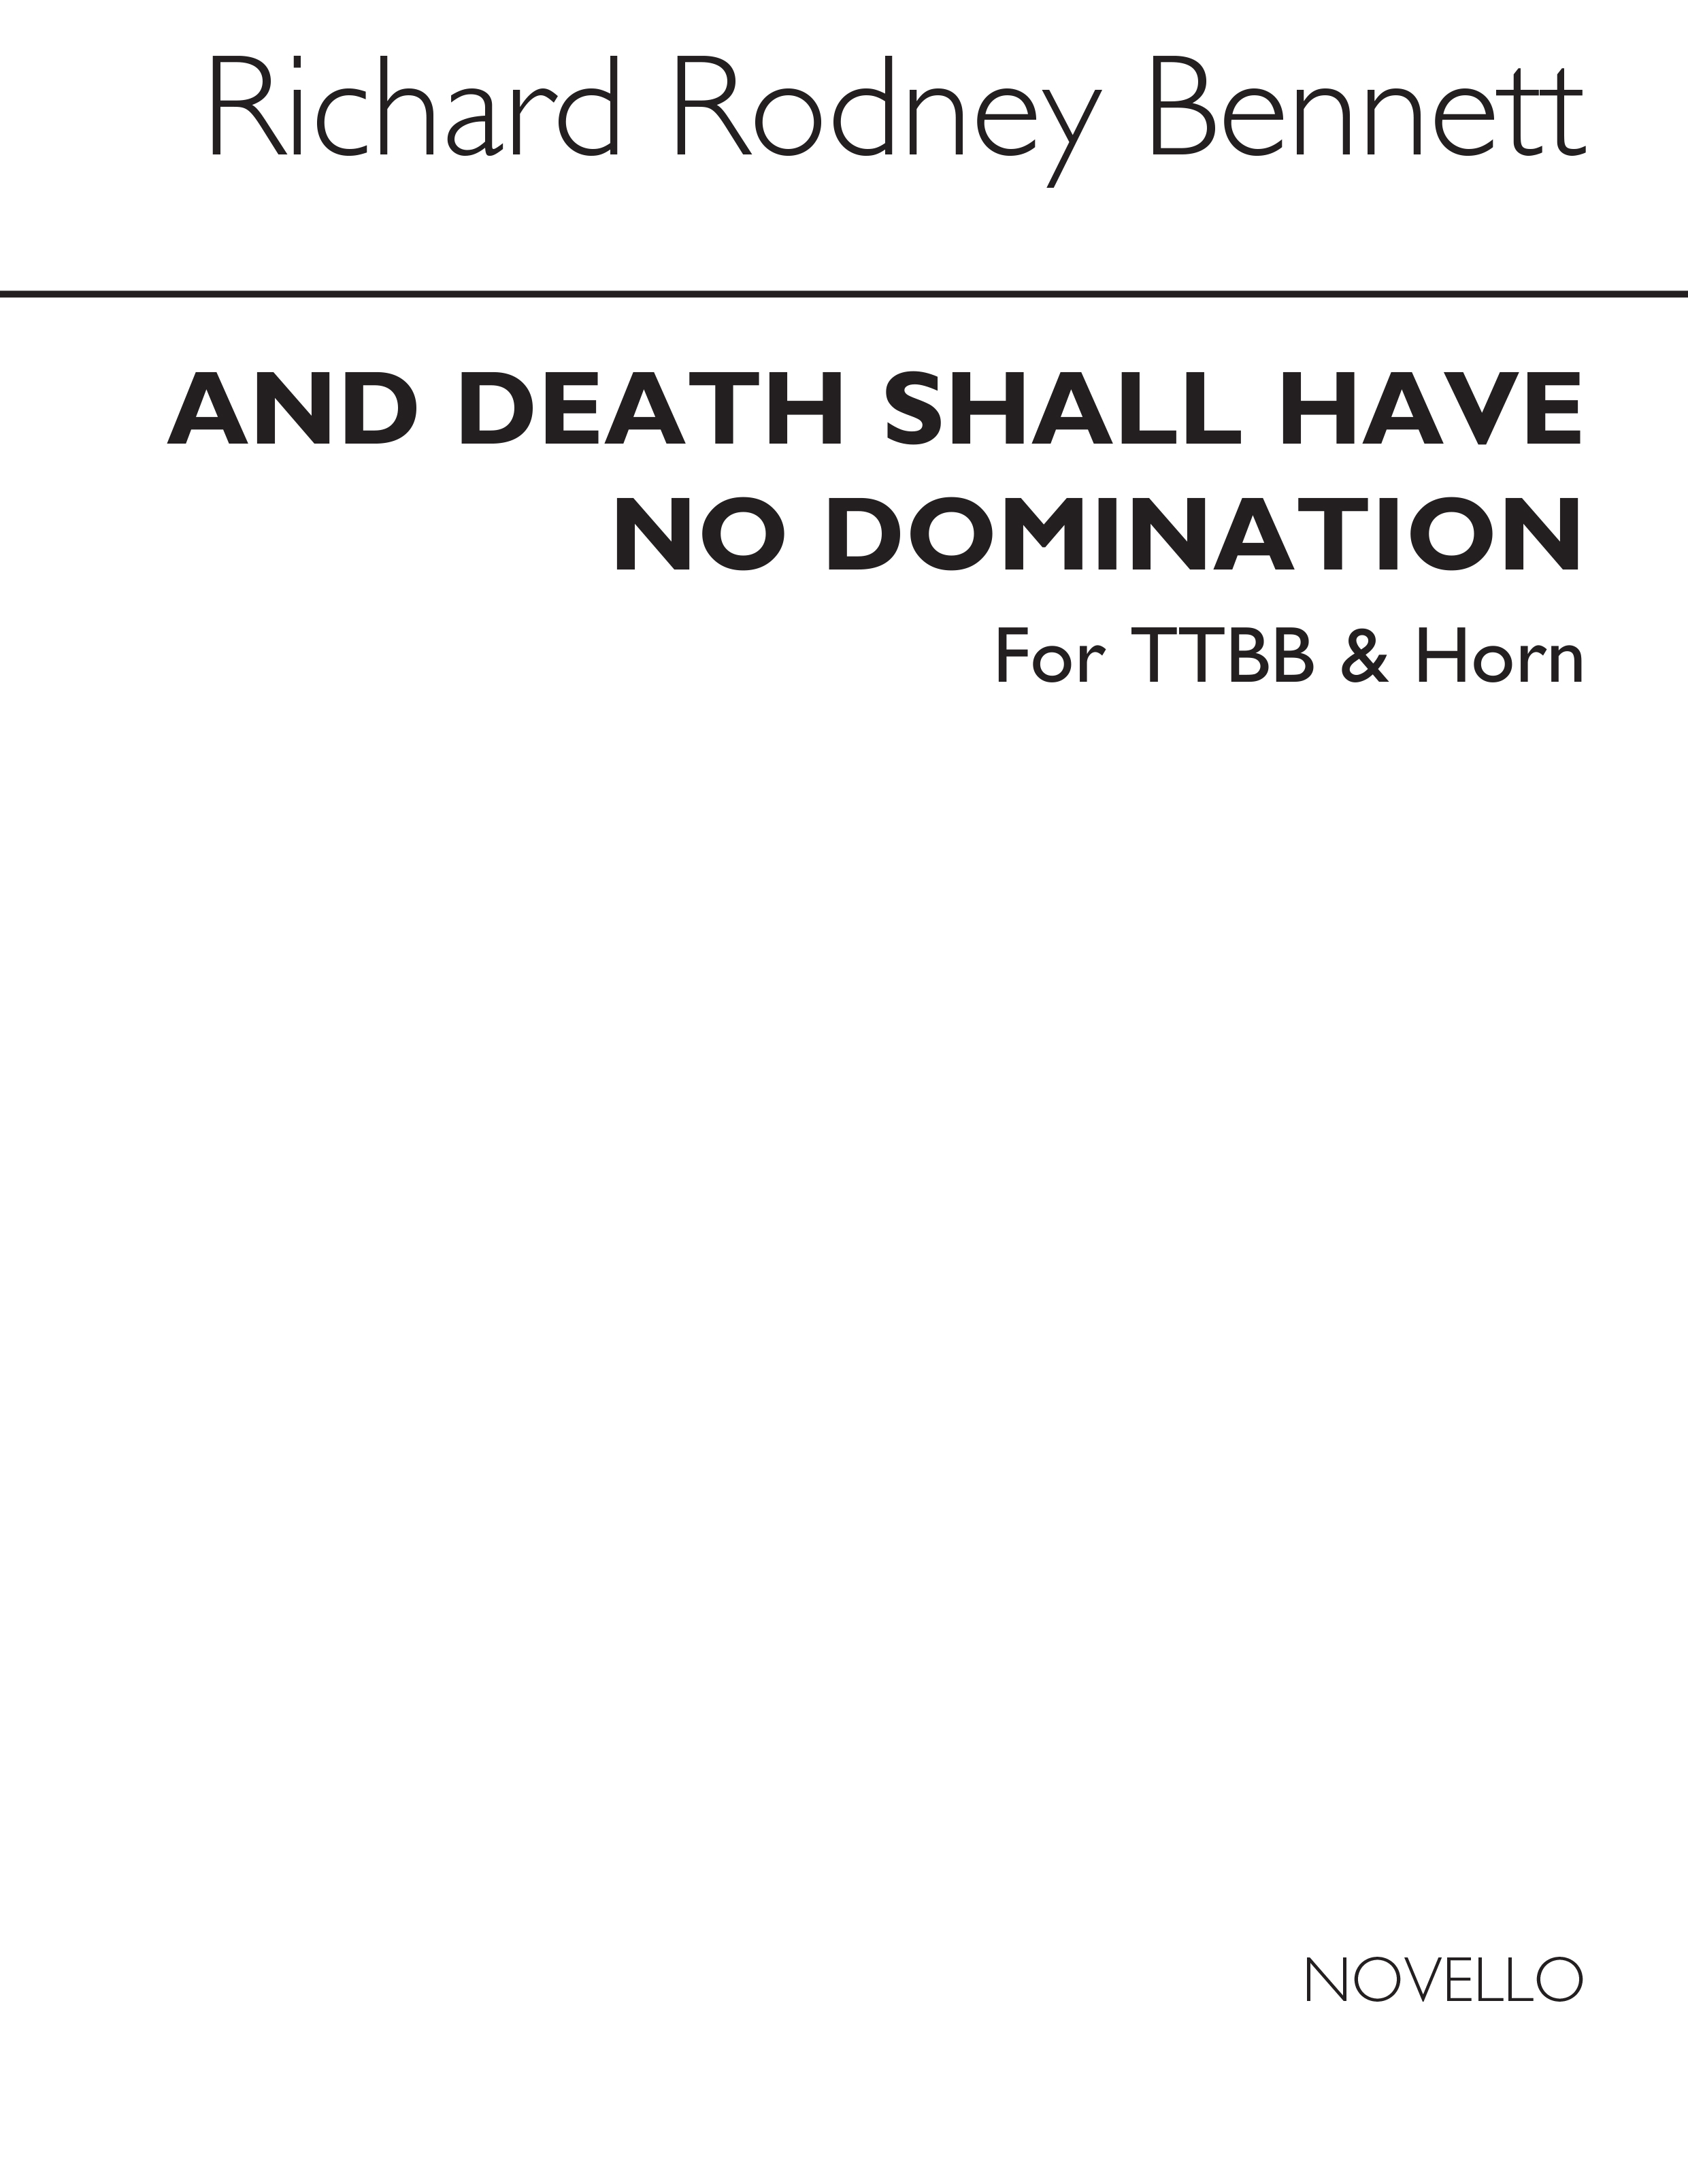 Richard Rodney Bennett: And Death Shall Have No Dominion